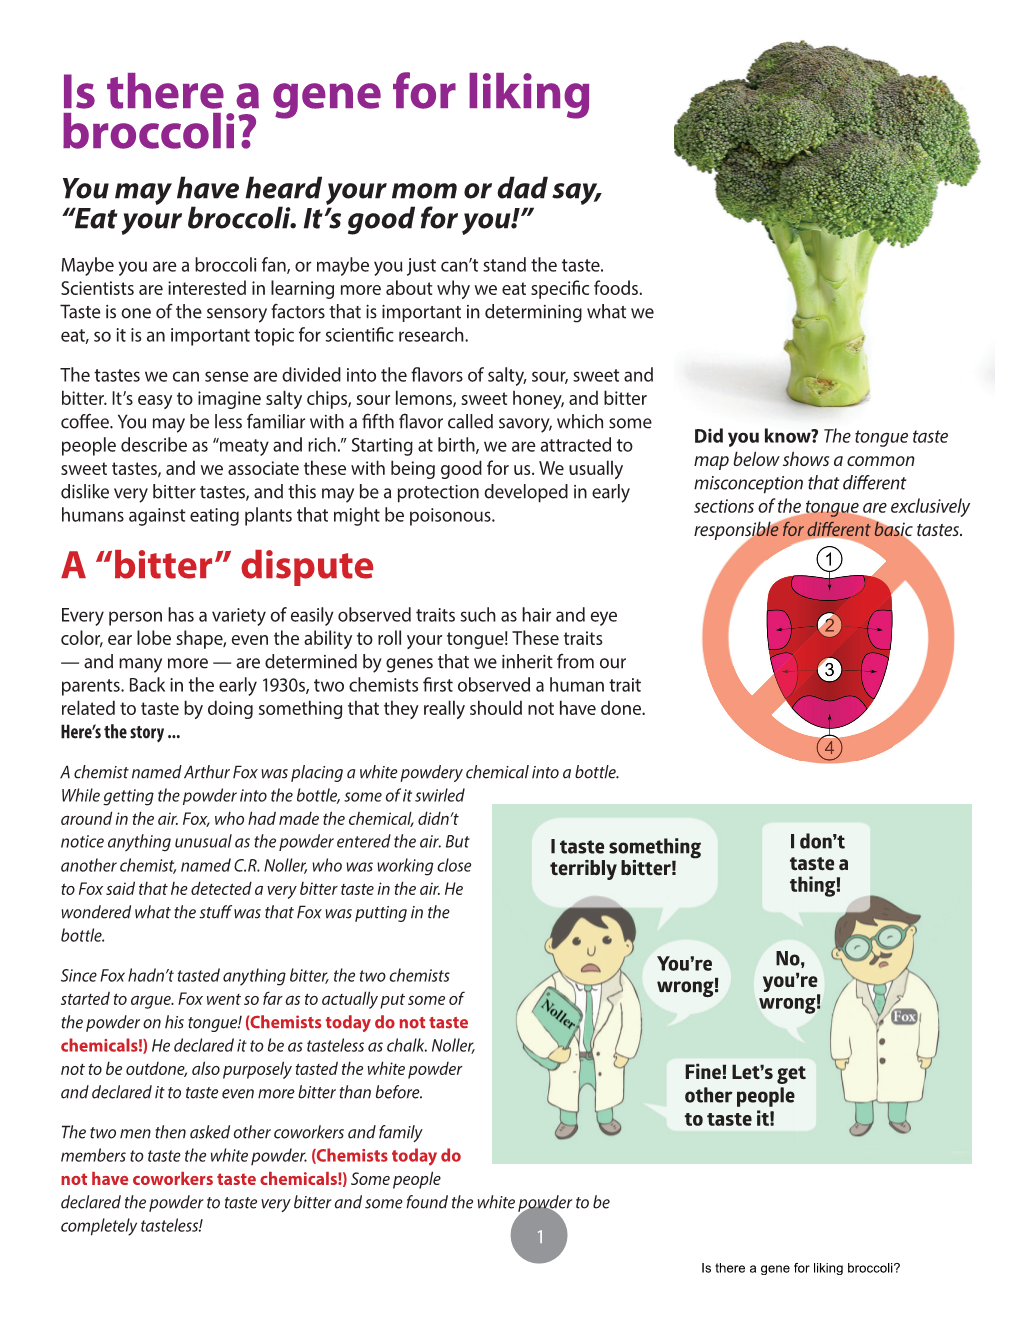 Is There a Gene for Liking Broccoli? You May Have Heard Your Mom Or Dad Say, “Eat Your Broccoli